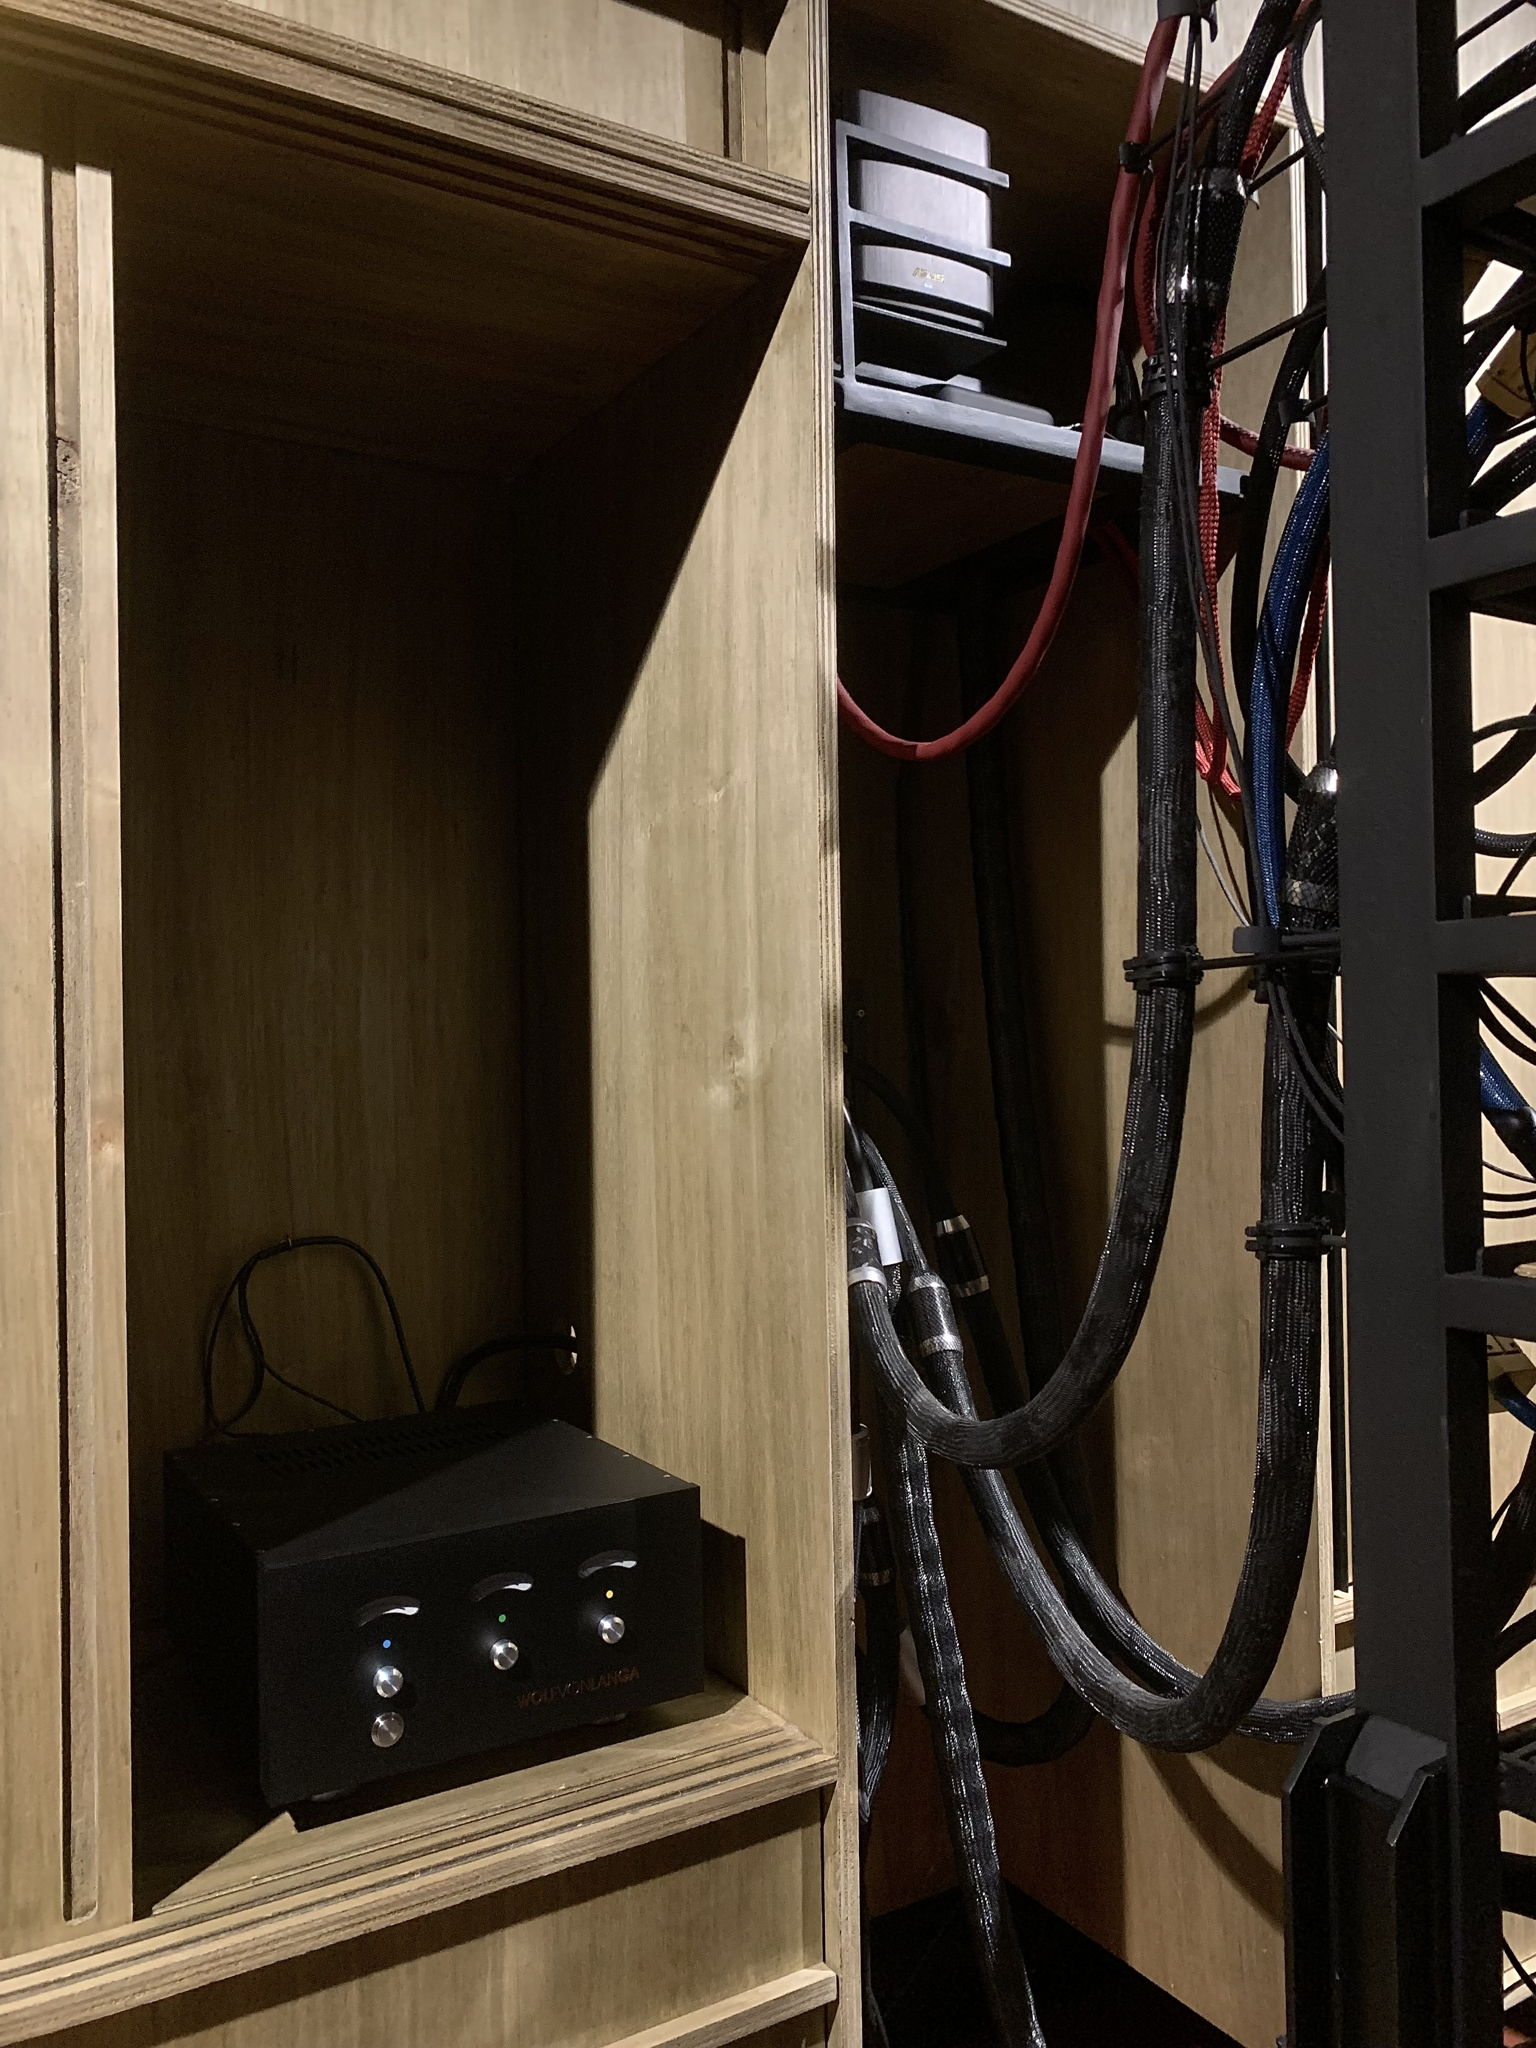 The power supply for the WVL Chicago has been located in a vented cabinet equidistant between the speakers for greater ease of separation with the speaker cables, and to close proximity to the dedicated and unfiltered main power outlets.